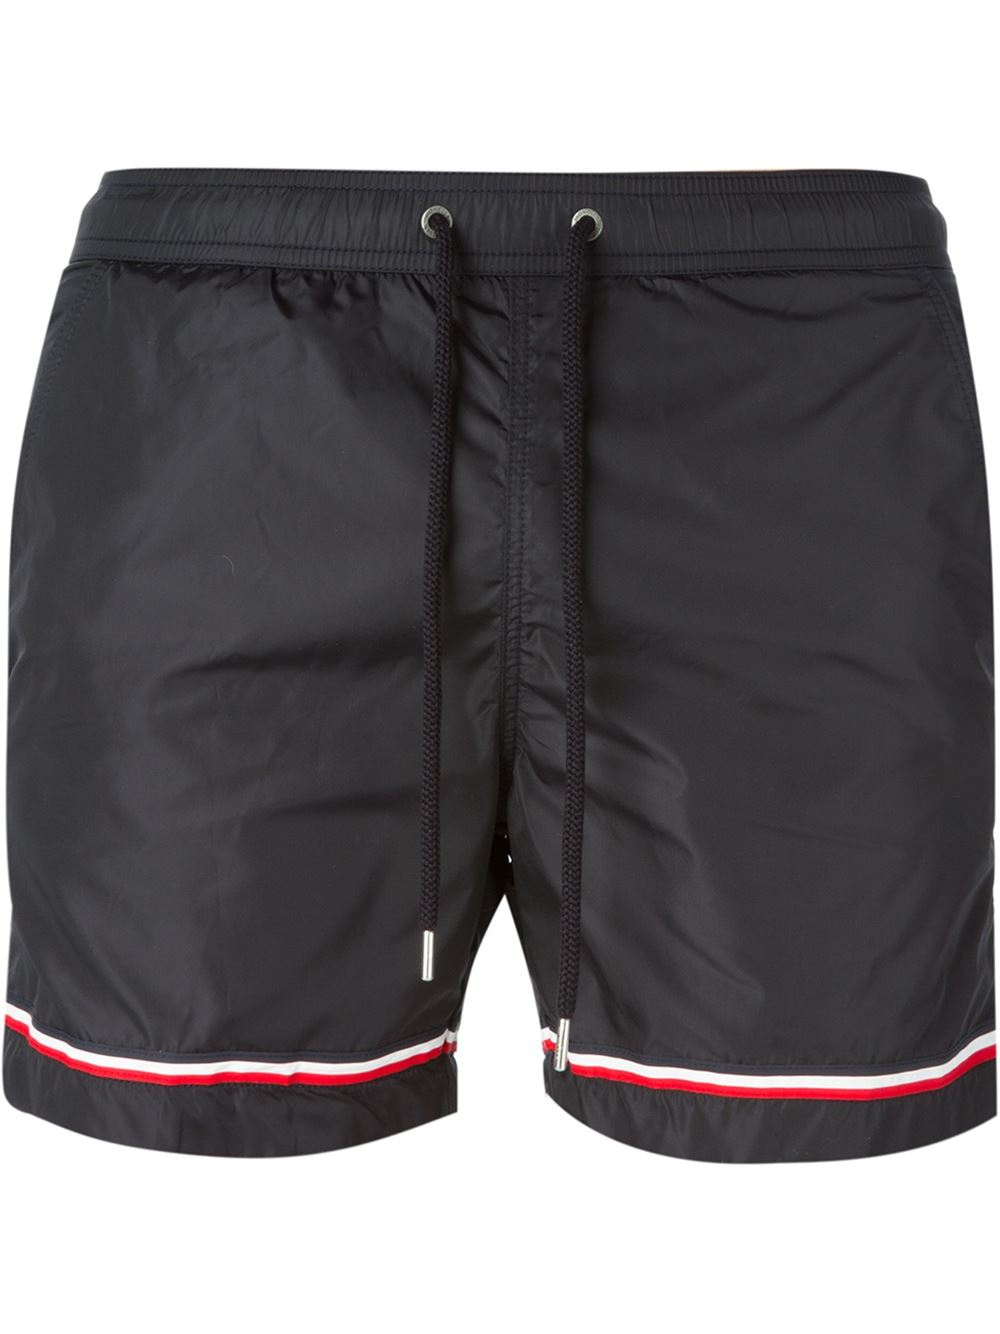 Lyst - Moncler Classic Swimming Shorts in Black for Men